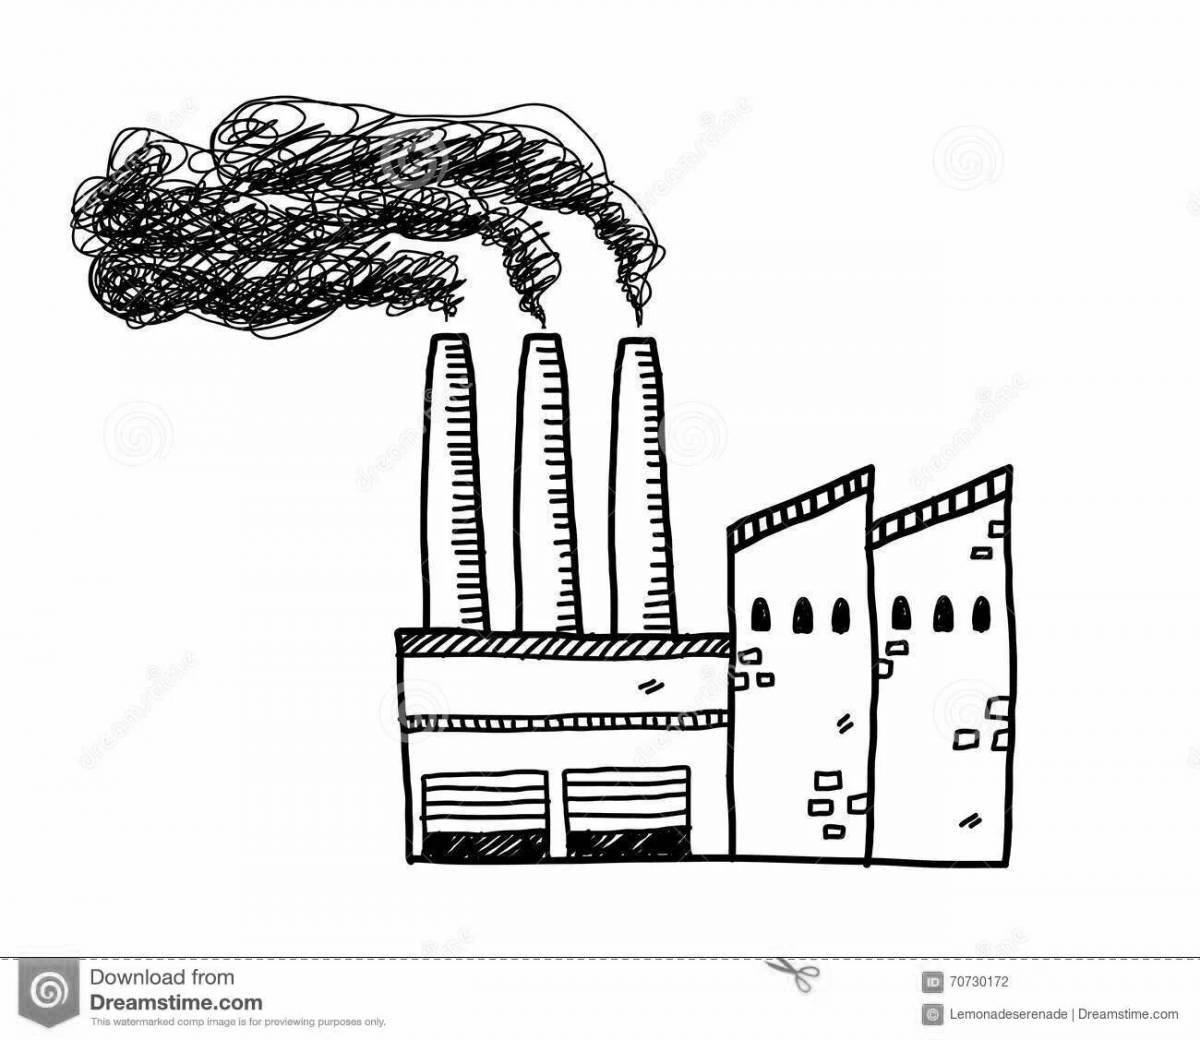 Air pollution educational coloring book